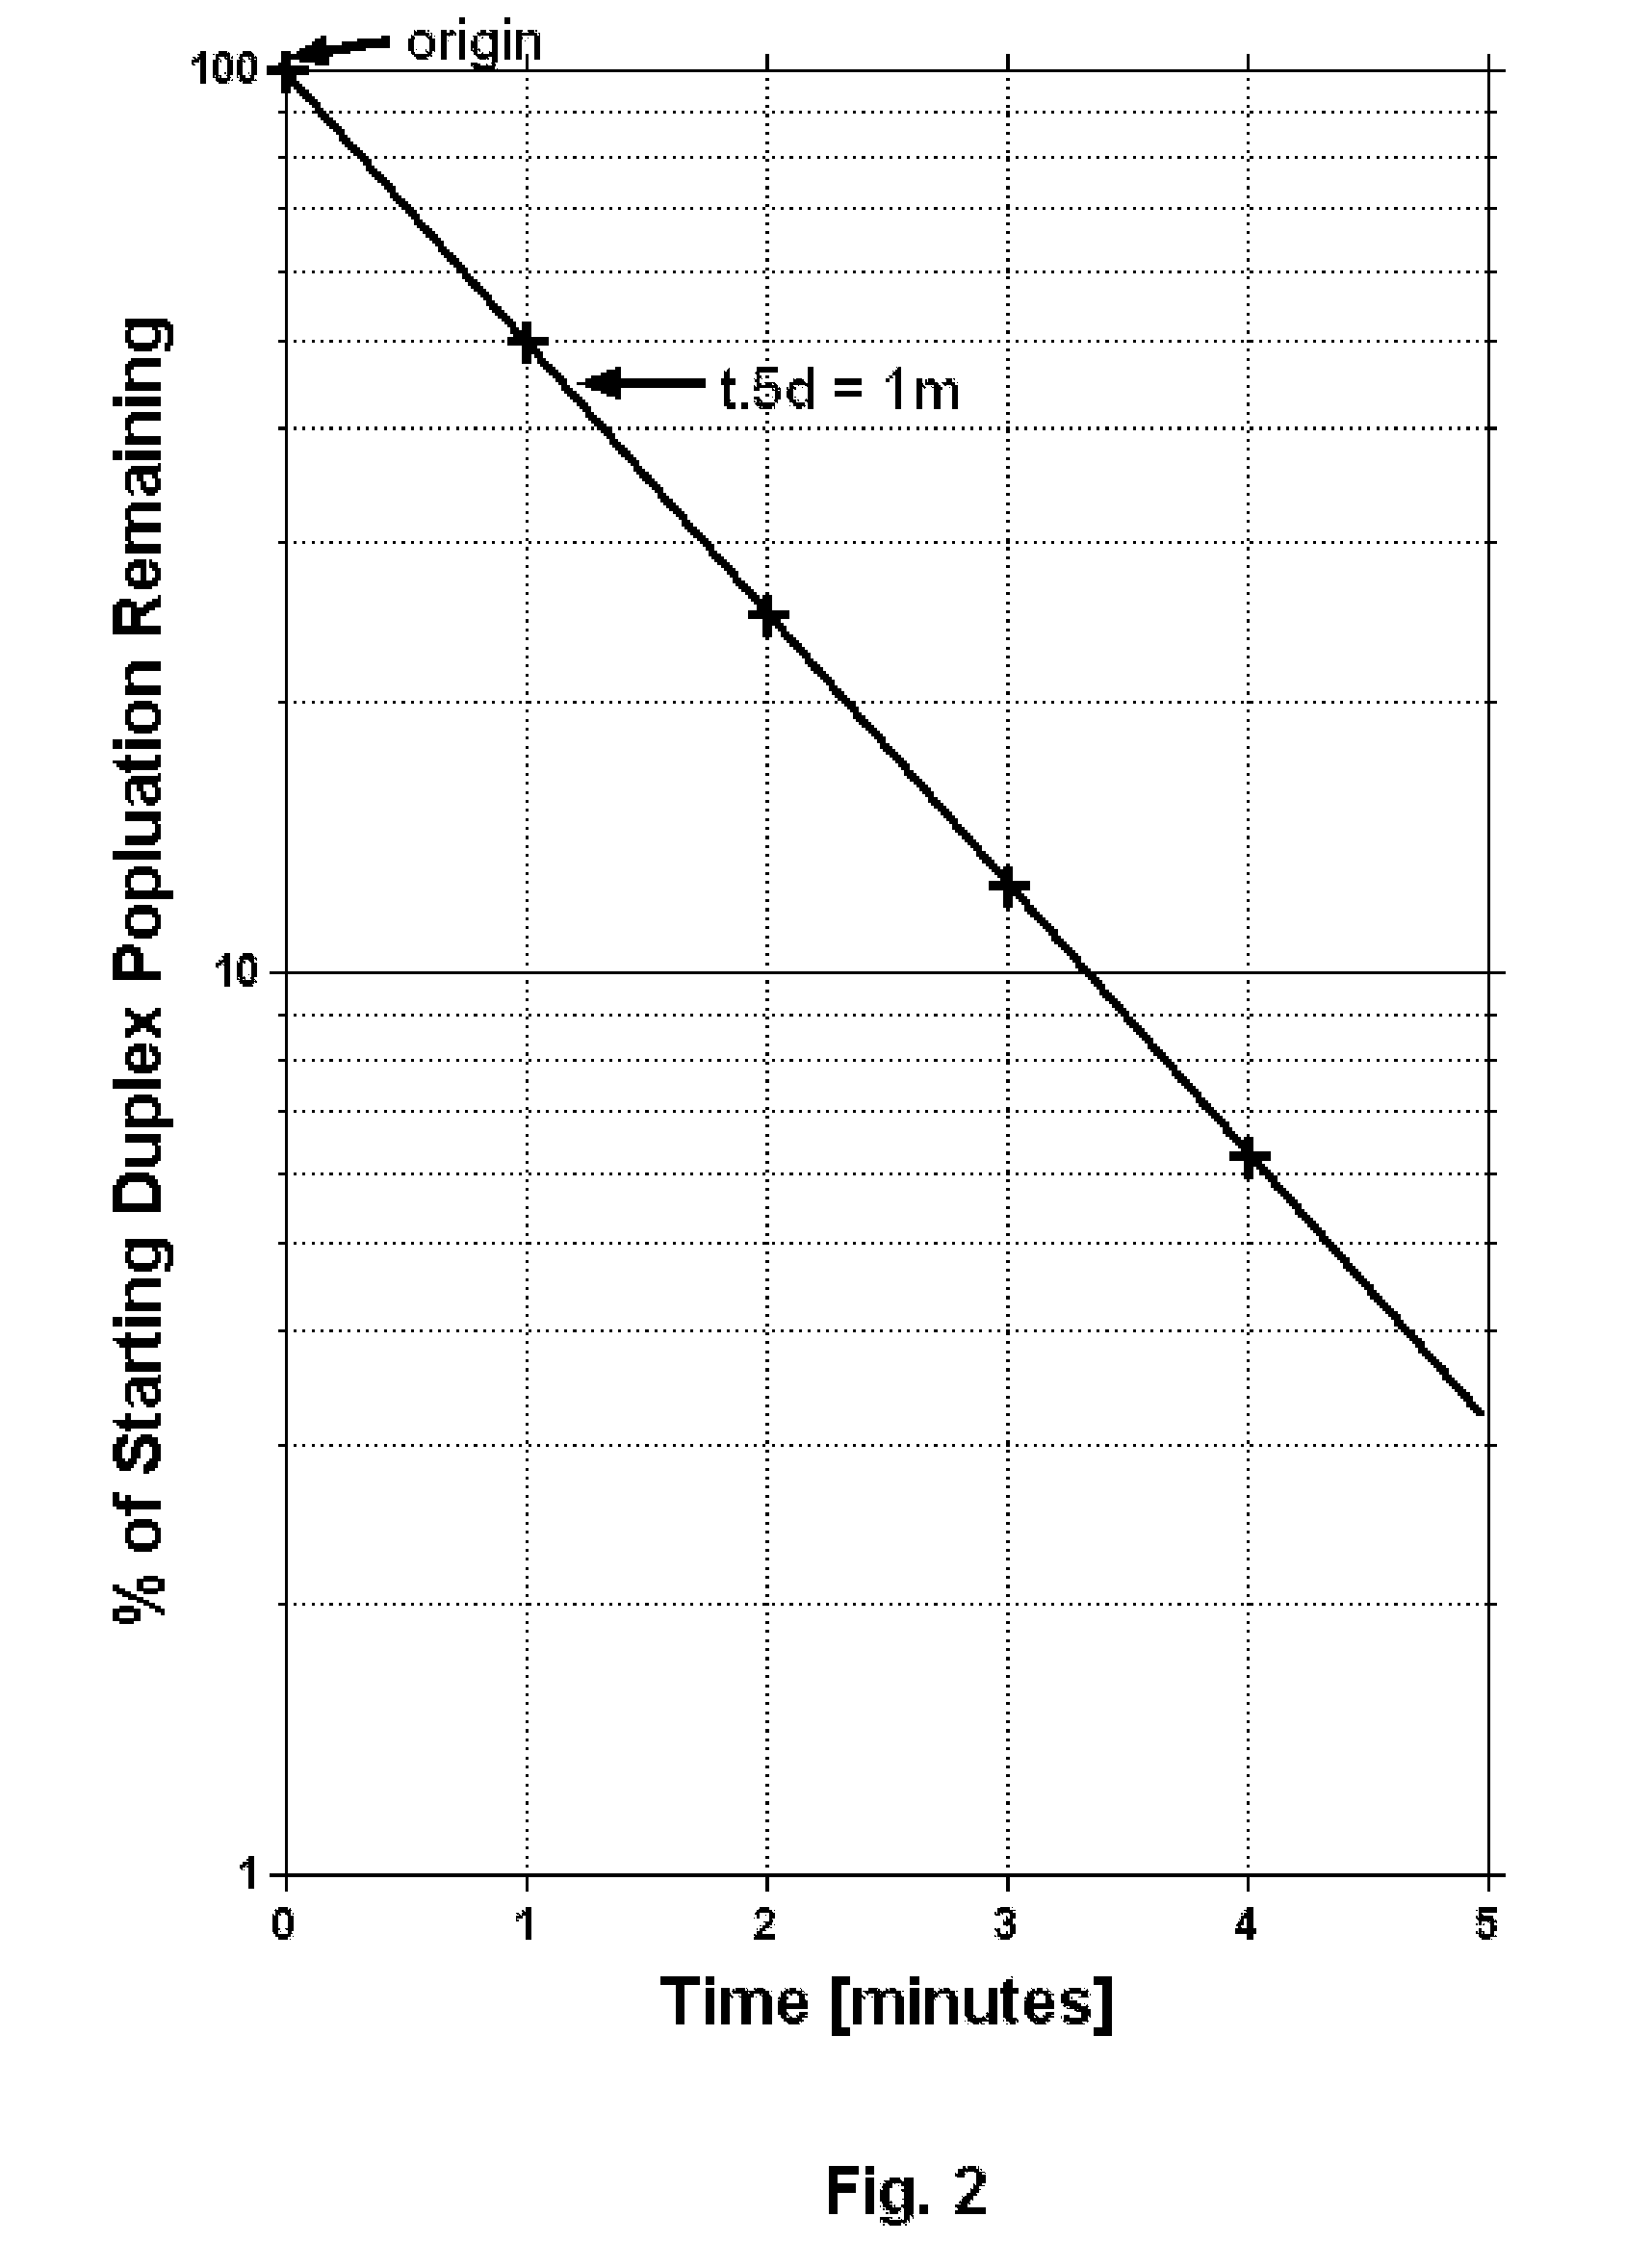 Method for producing improved nucleic acid oligomer functional homogeneity and functional characteristic information and results and oligomer application results